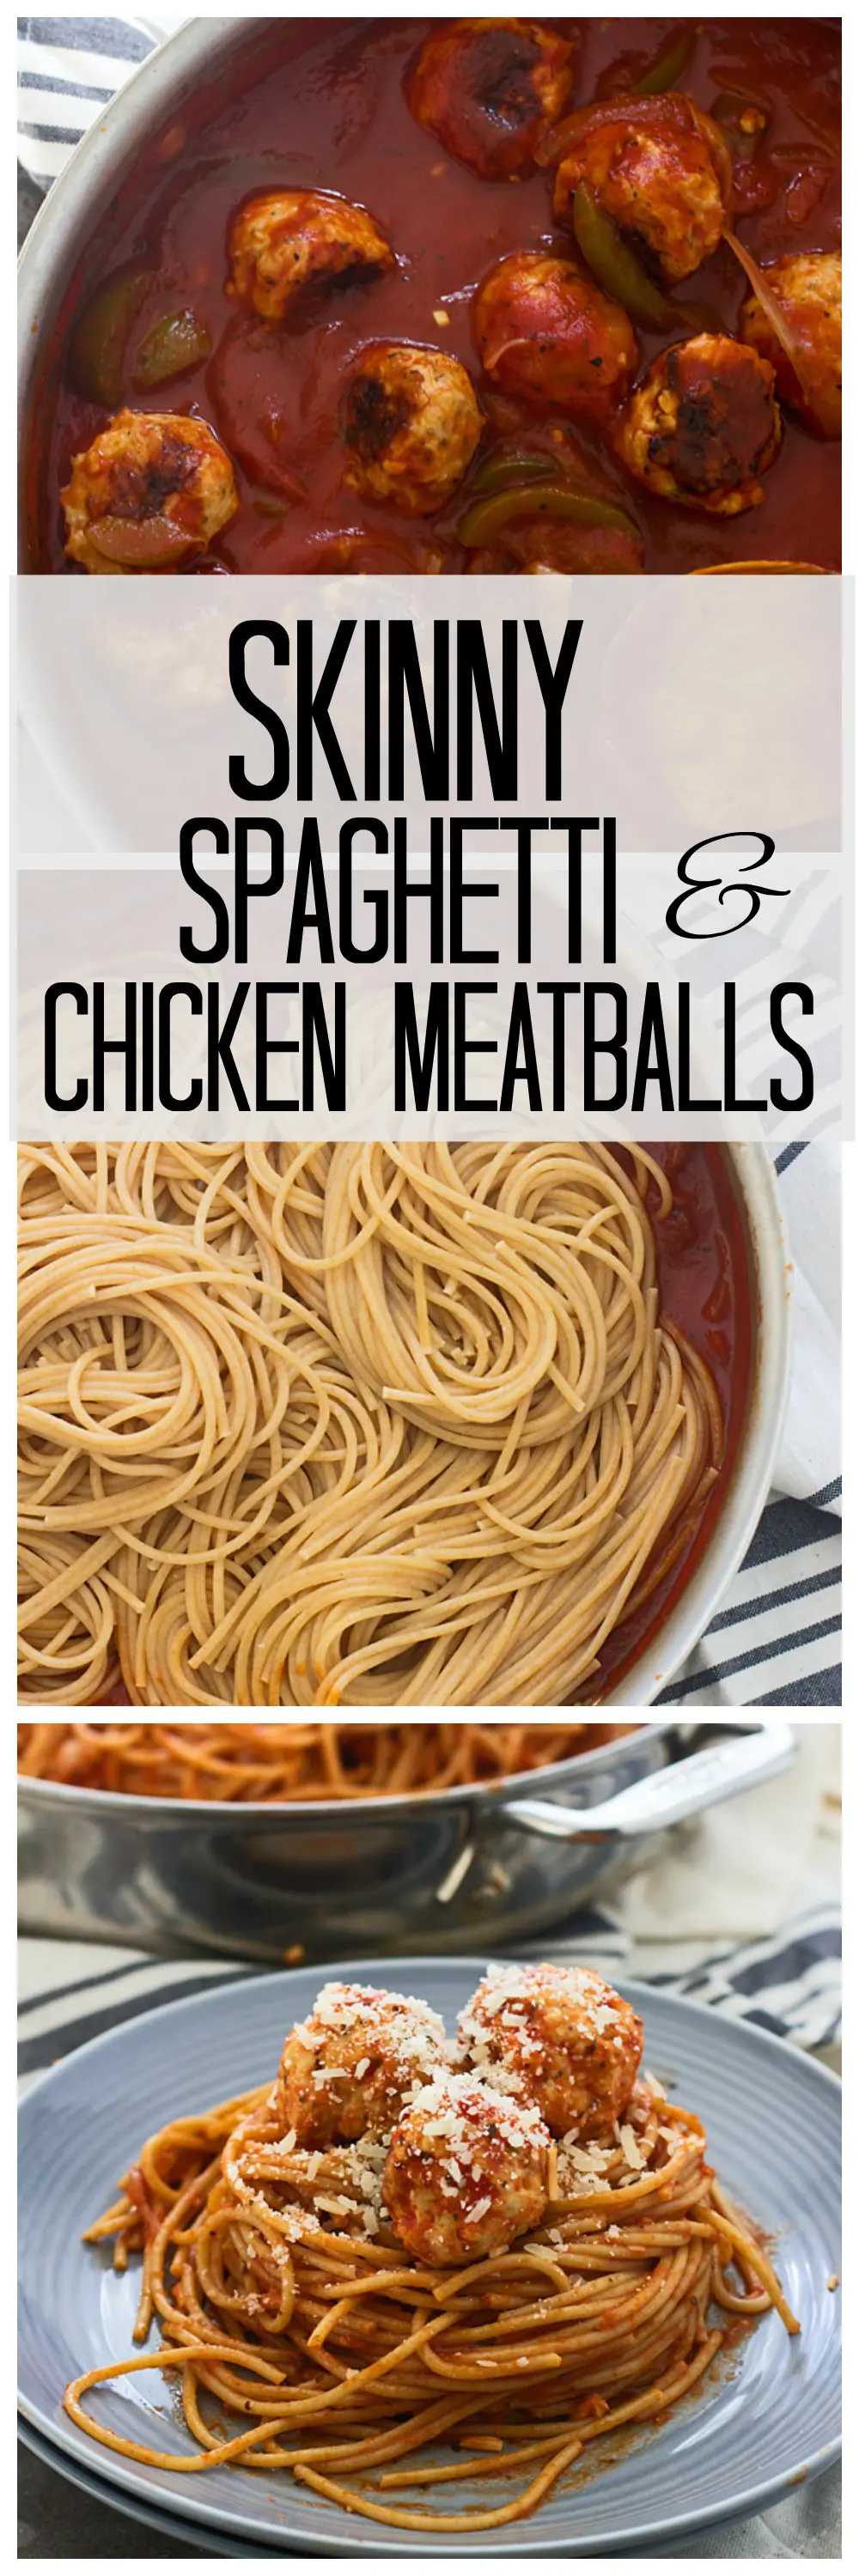 Skinny Spaghetti and Chicken Meatballs -- All the flavor, with a fraction of the fat and added fiber!